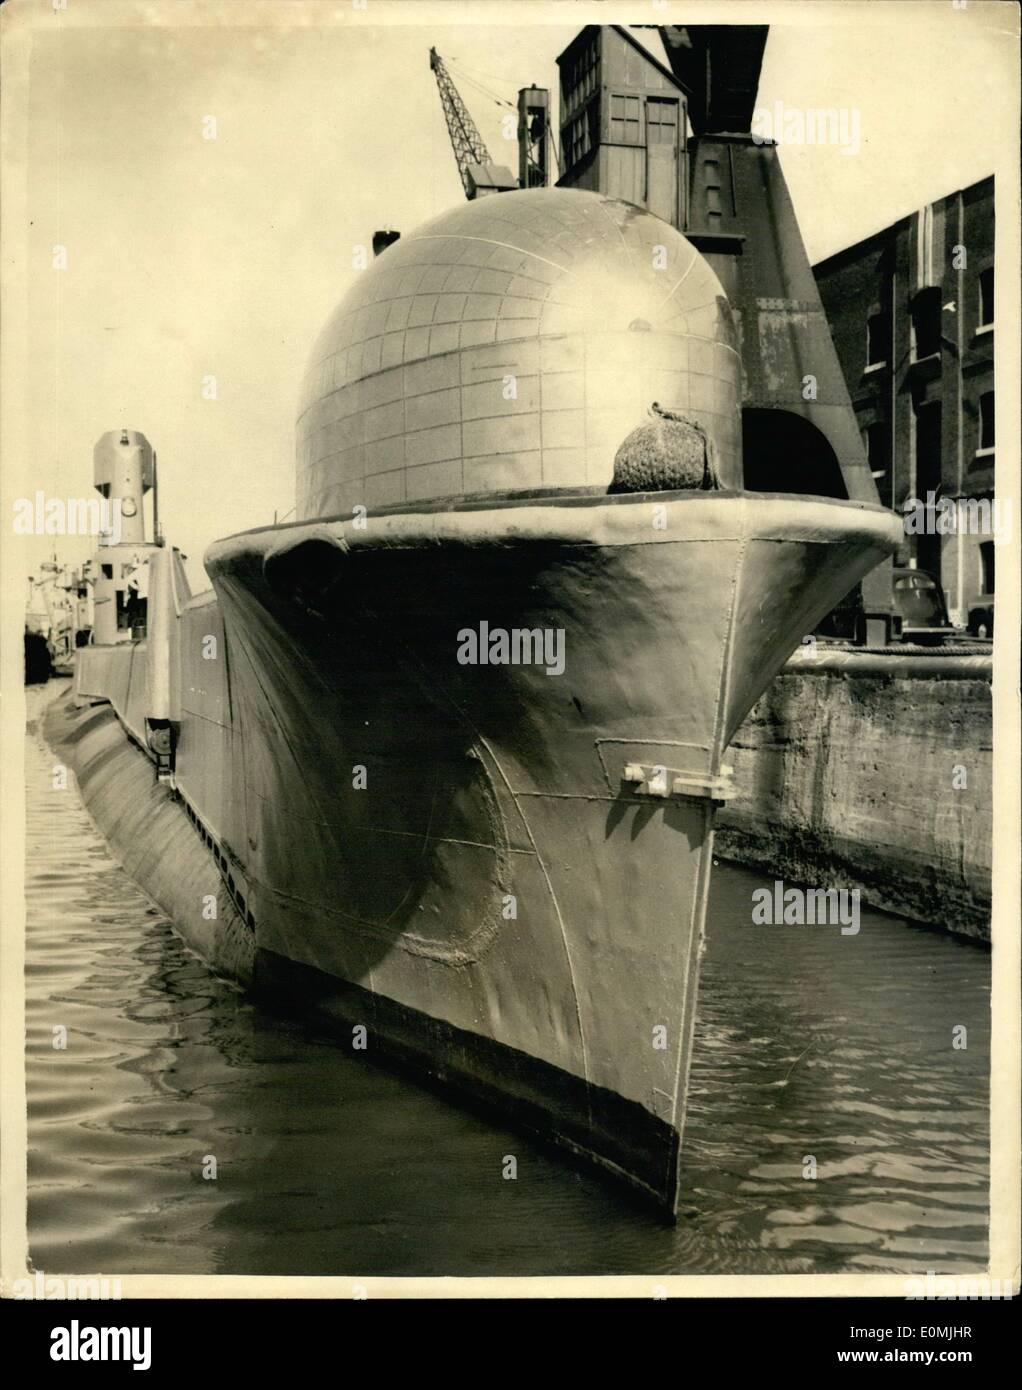 Jun. 06, 1955 - The R.N. Experimental Submarine comes to London Strange Dome on the Bows. H.N.E. Thermopylae commanded by Lieut. Commander W.D. Scott R.N. is now on a visit to London and was to be seen at the East India Dock this afternoon. She was built at Chatham in 1945 and has been moderniedlengthened and is now used mainly for experimental purposes. She has been streamlined and has also been fitted with a strange looking dome on the bows. Photo shows head on view of the craft at the East India Docks this afternoon - showing the unusual looking dome on her bows. Stock Photo